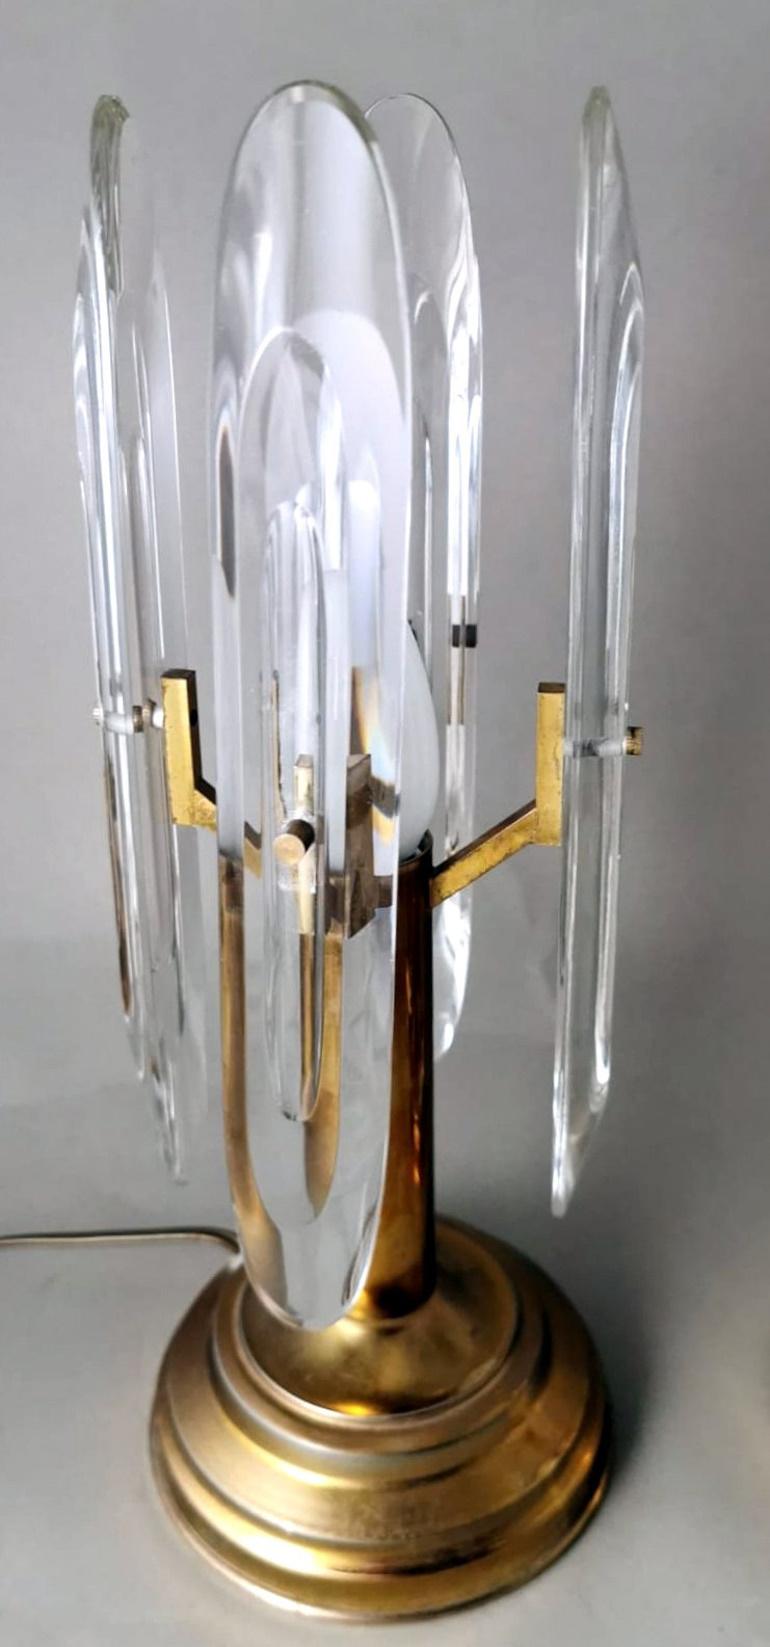 Sciolari Gaetano Pair Of Italian Table Lamps In Brass And Crystal In Good Condition For Sale In Prato, Tuscany